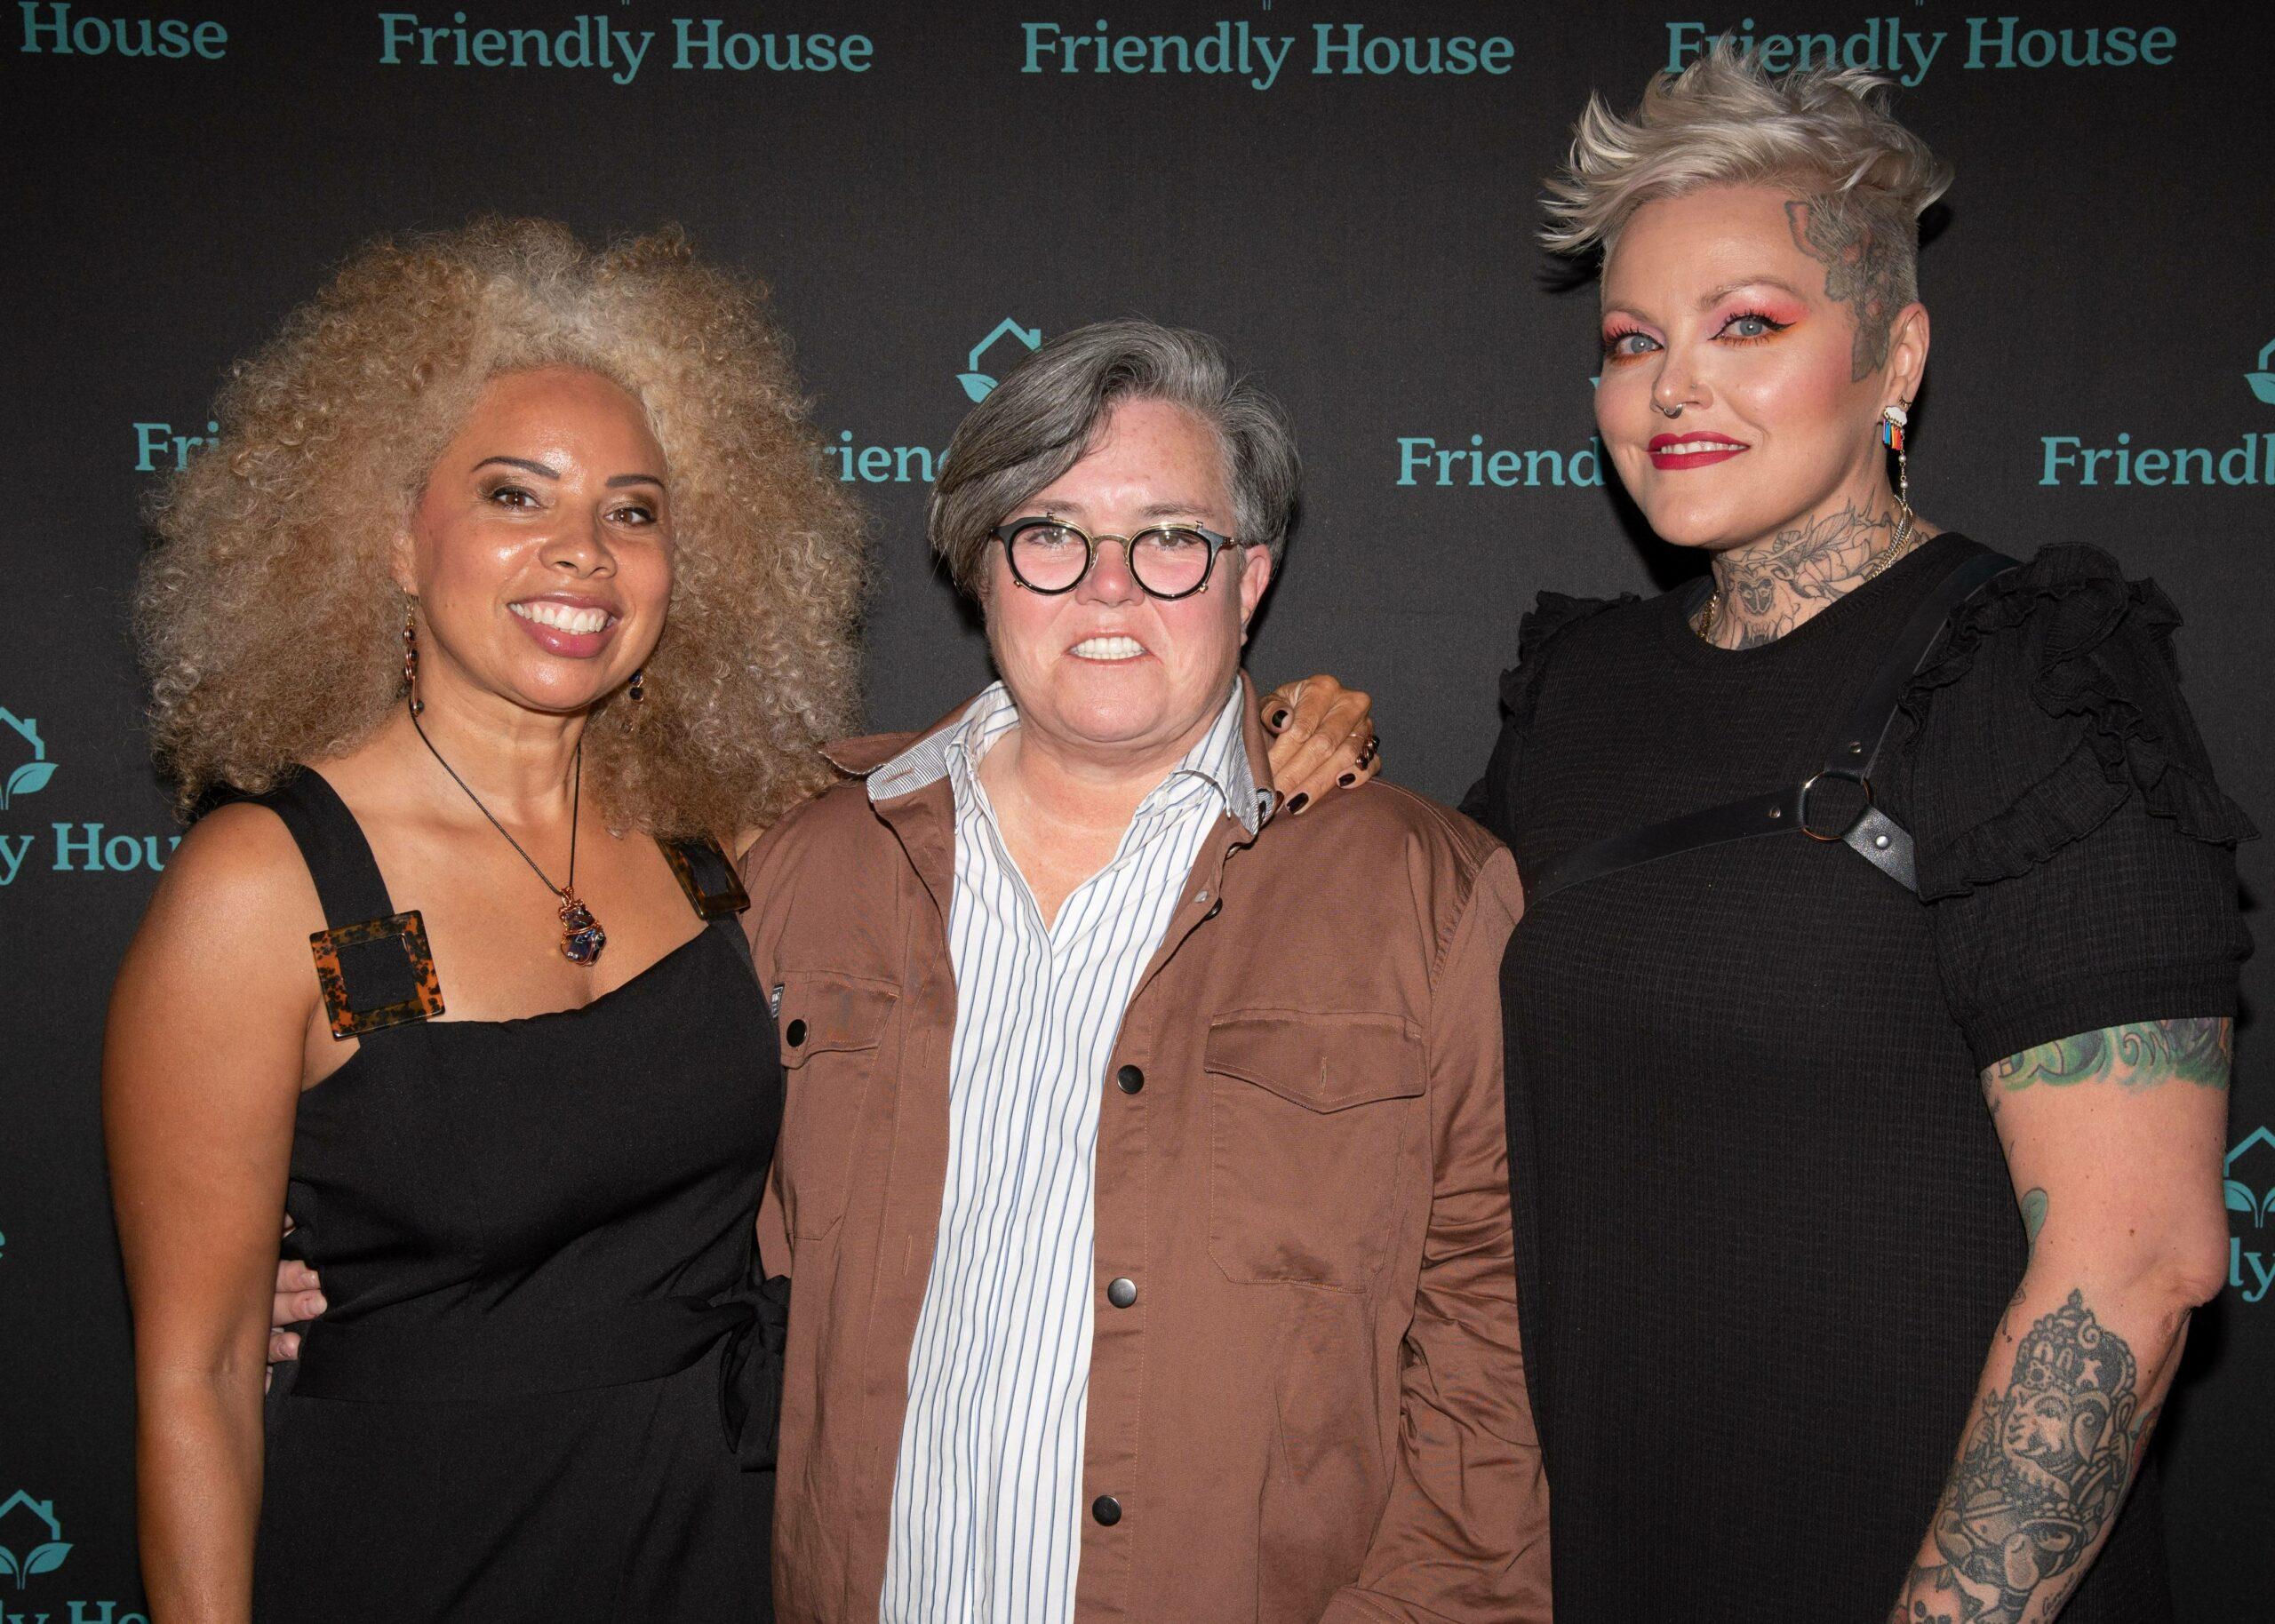 Rosie O'Donnell and Aimee Hauer at FRIENDLY HOUSE LA Comedy Benefit